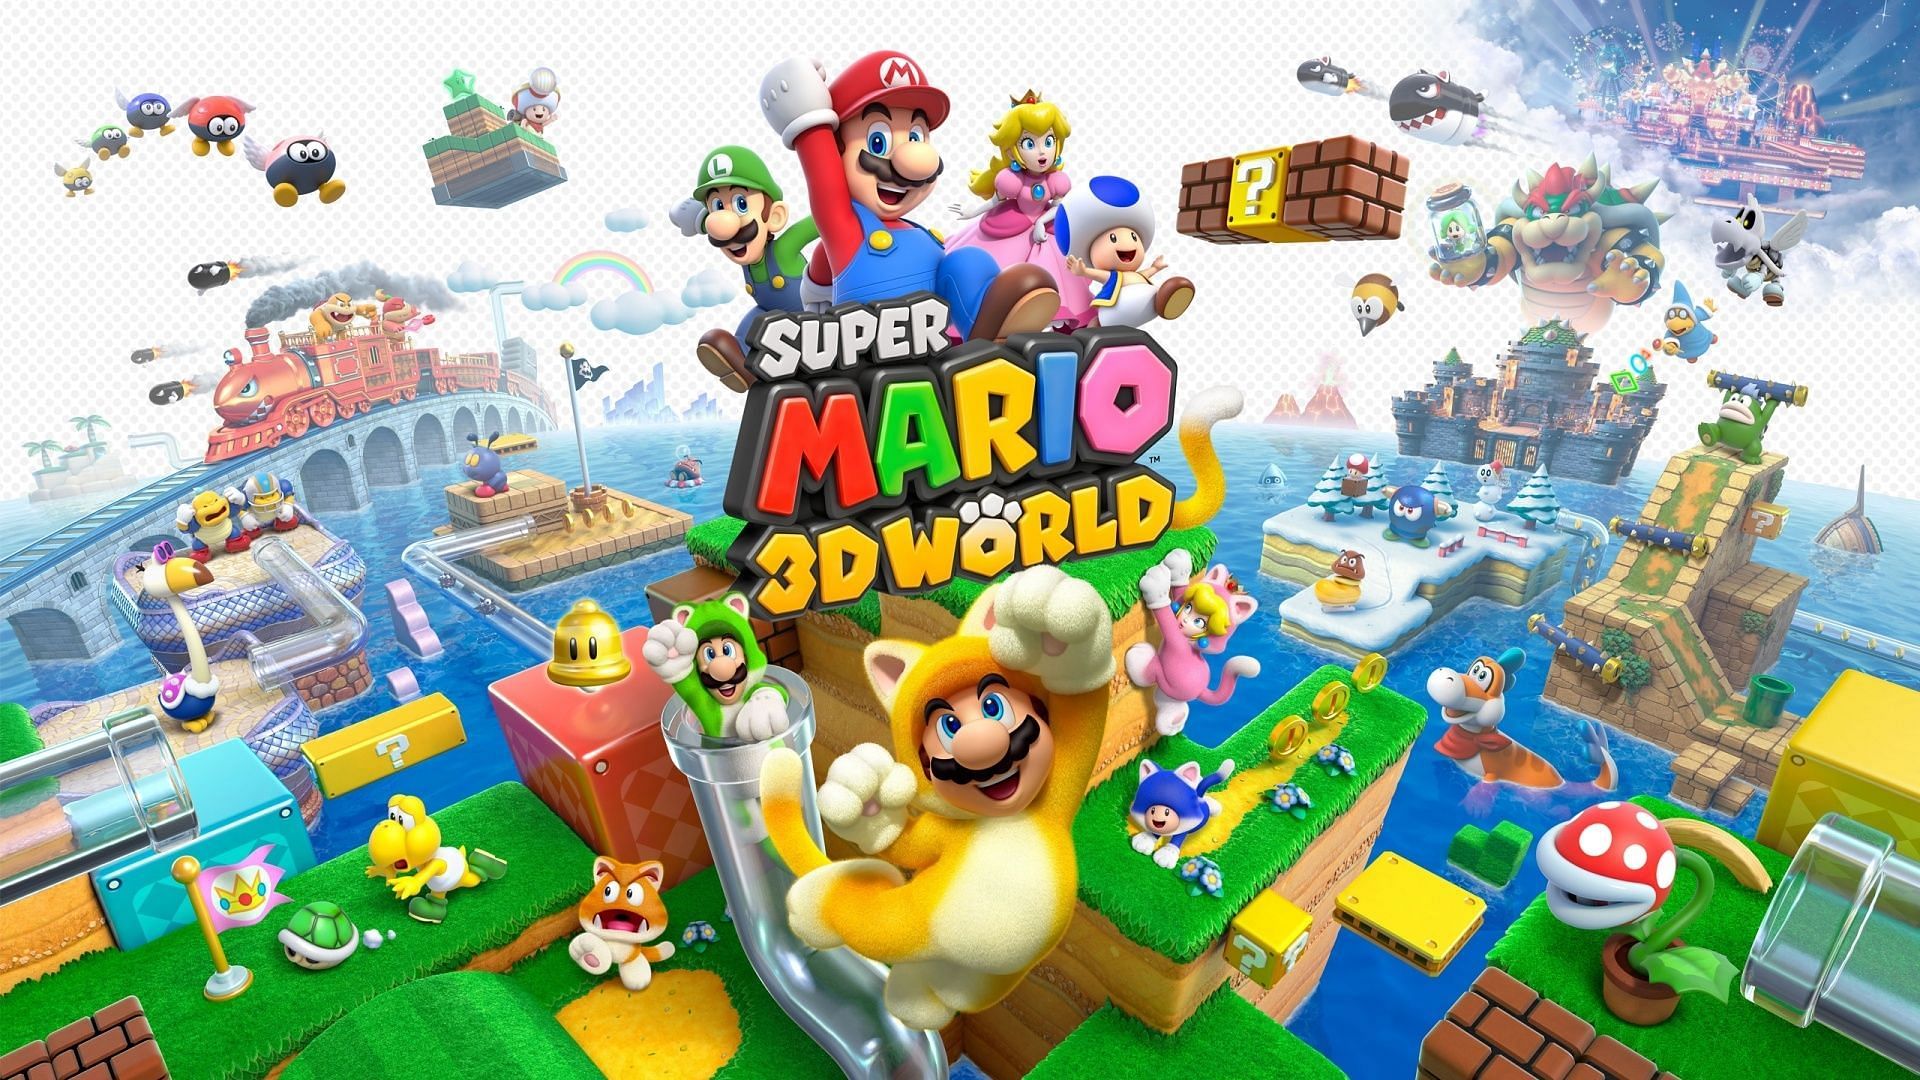 Released originally for the Wii U, the game was later ported to the Switch (Image via Nintendo)